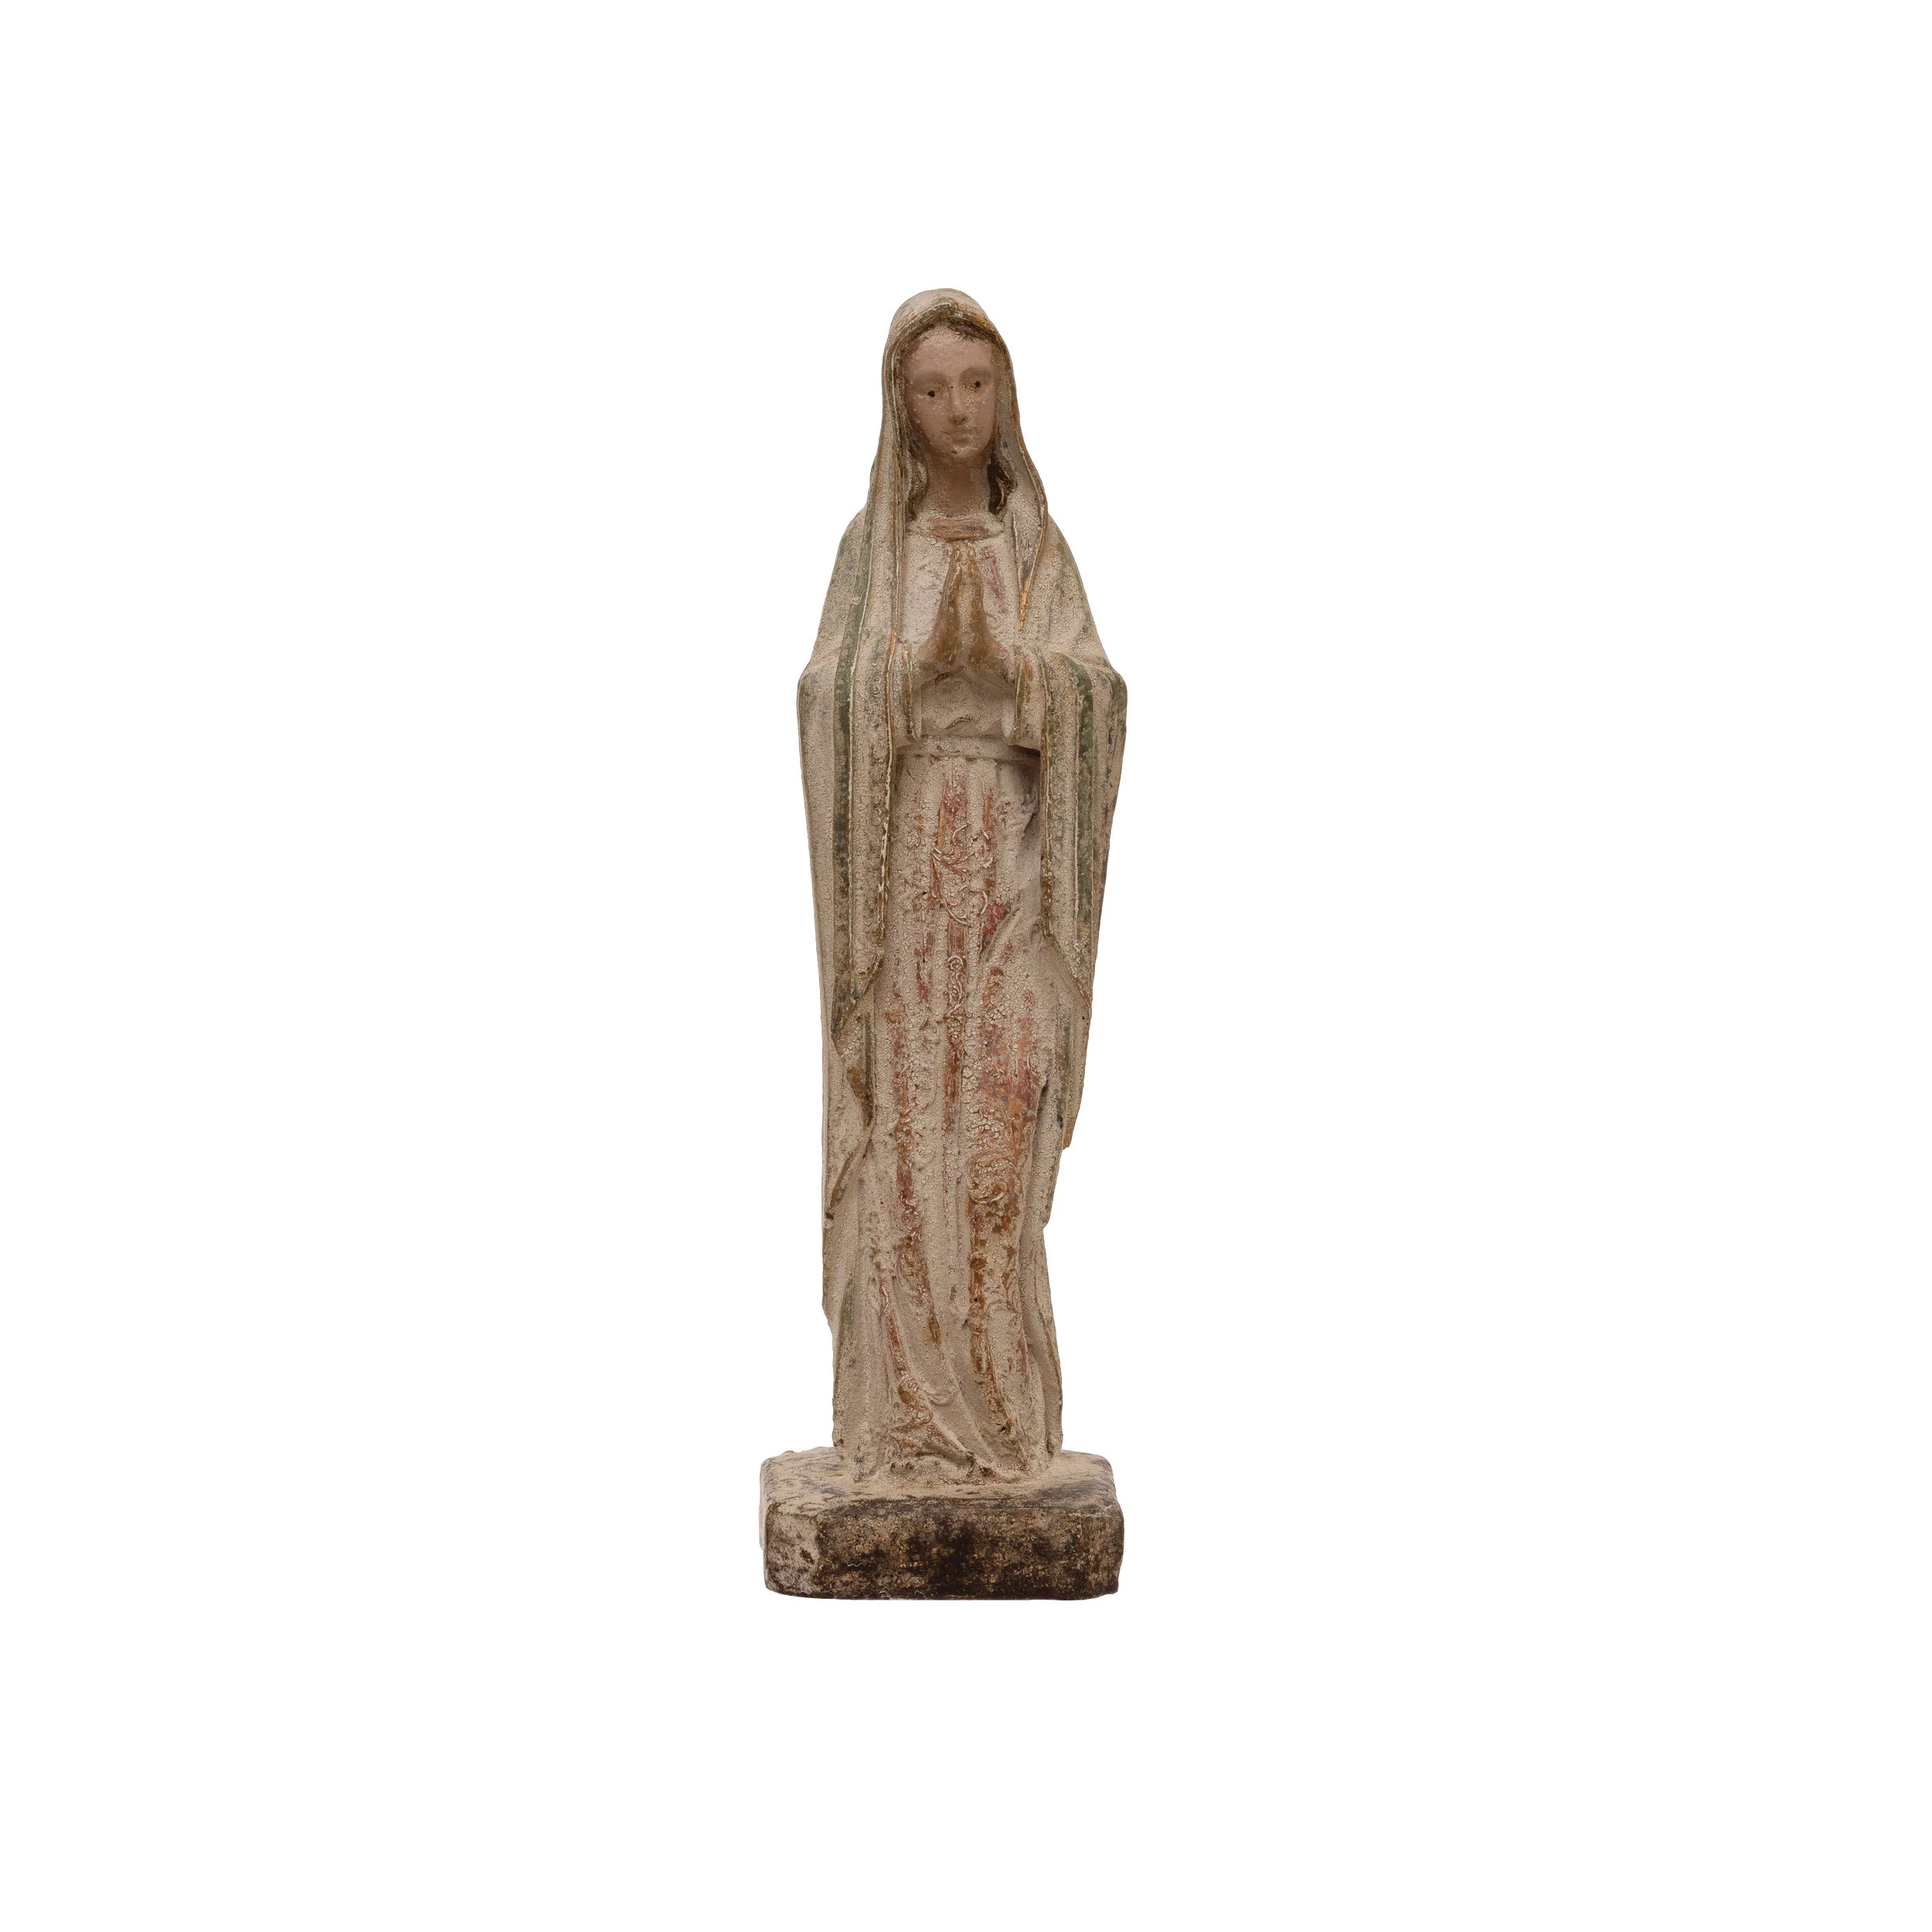 Magnesia Vintage Reproduction Virgin Mary Statue Flower Bouquet